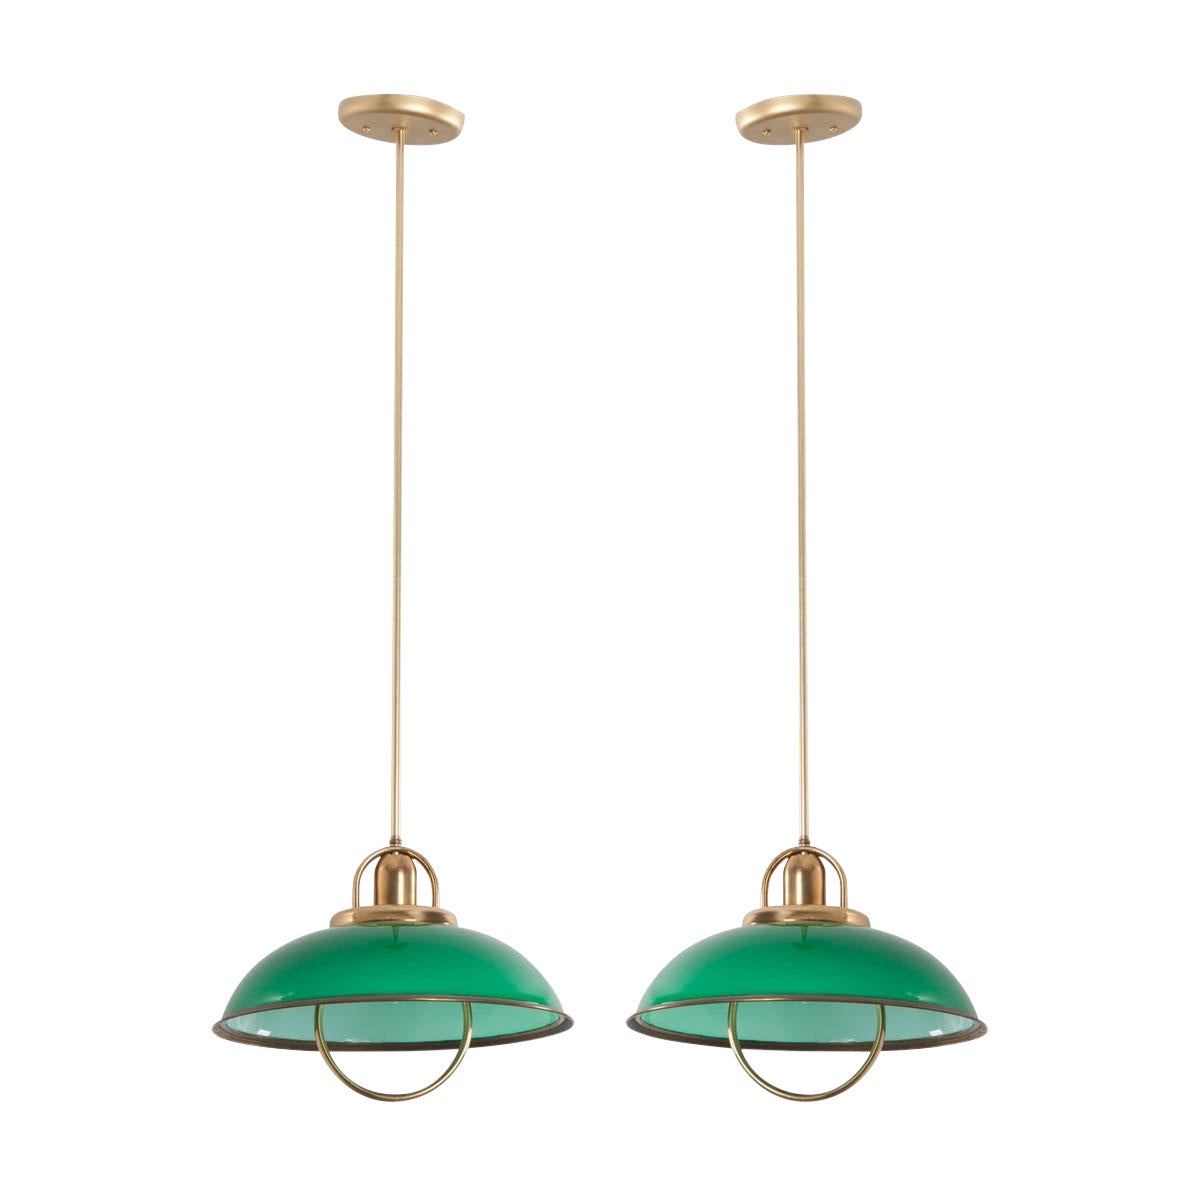 french-vintage-art-deco-green-glass-and-brass-pull-down-lights-a-pair-3801